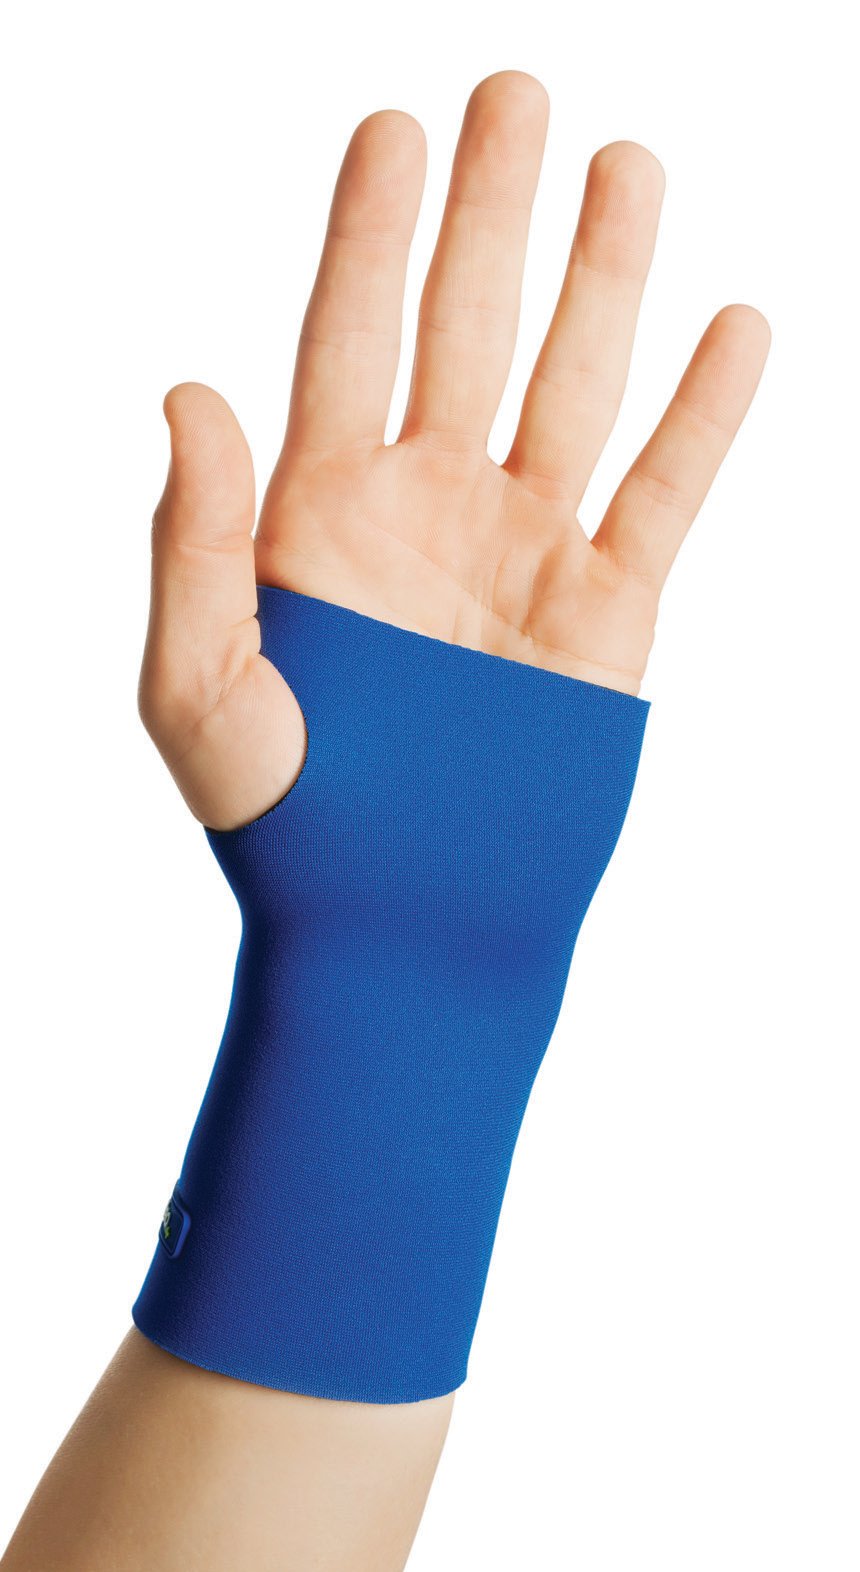 OAPL Thermic Wrist Support